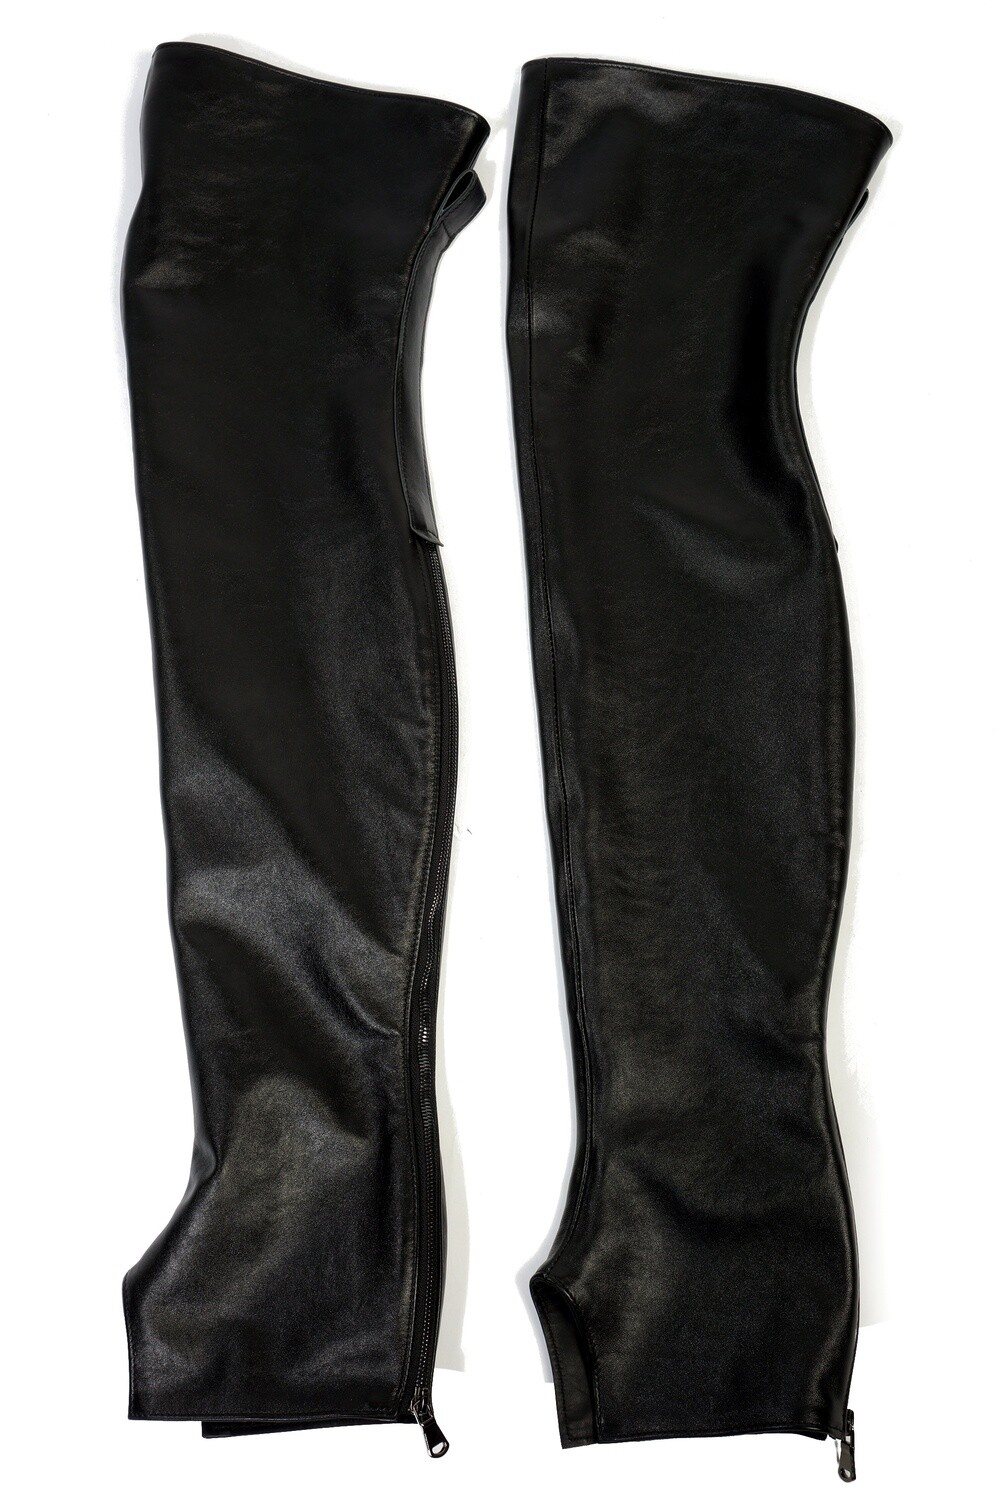 Women's leather high gaiters to the middle of the thigh